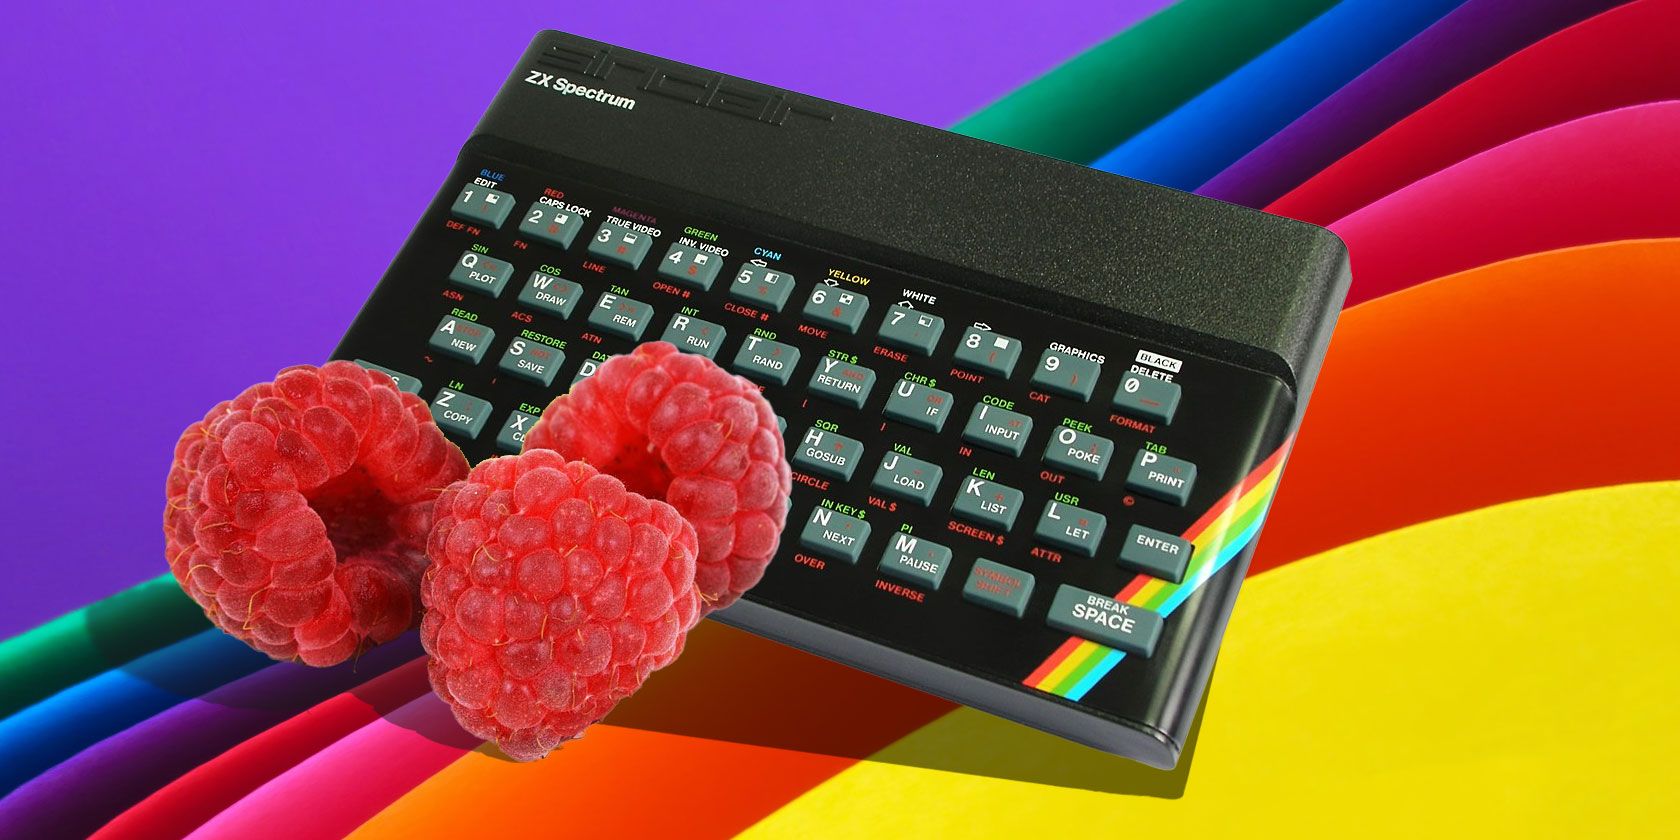 Turn Your Original Raspberry Pi into a ZX Spectrum Computer With 